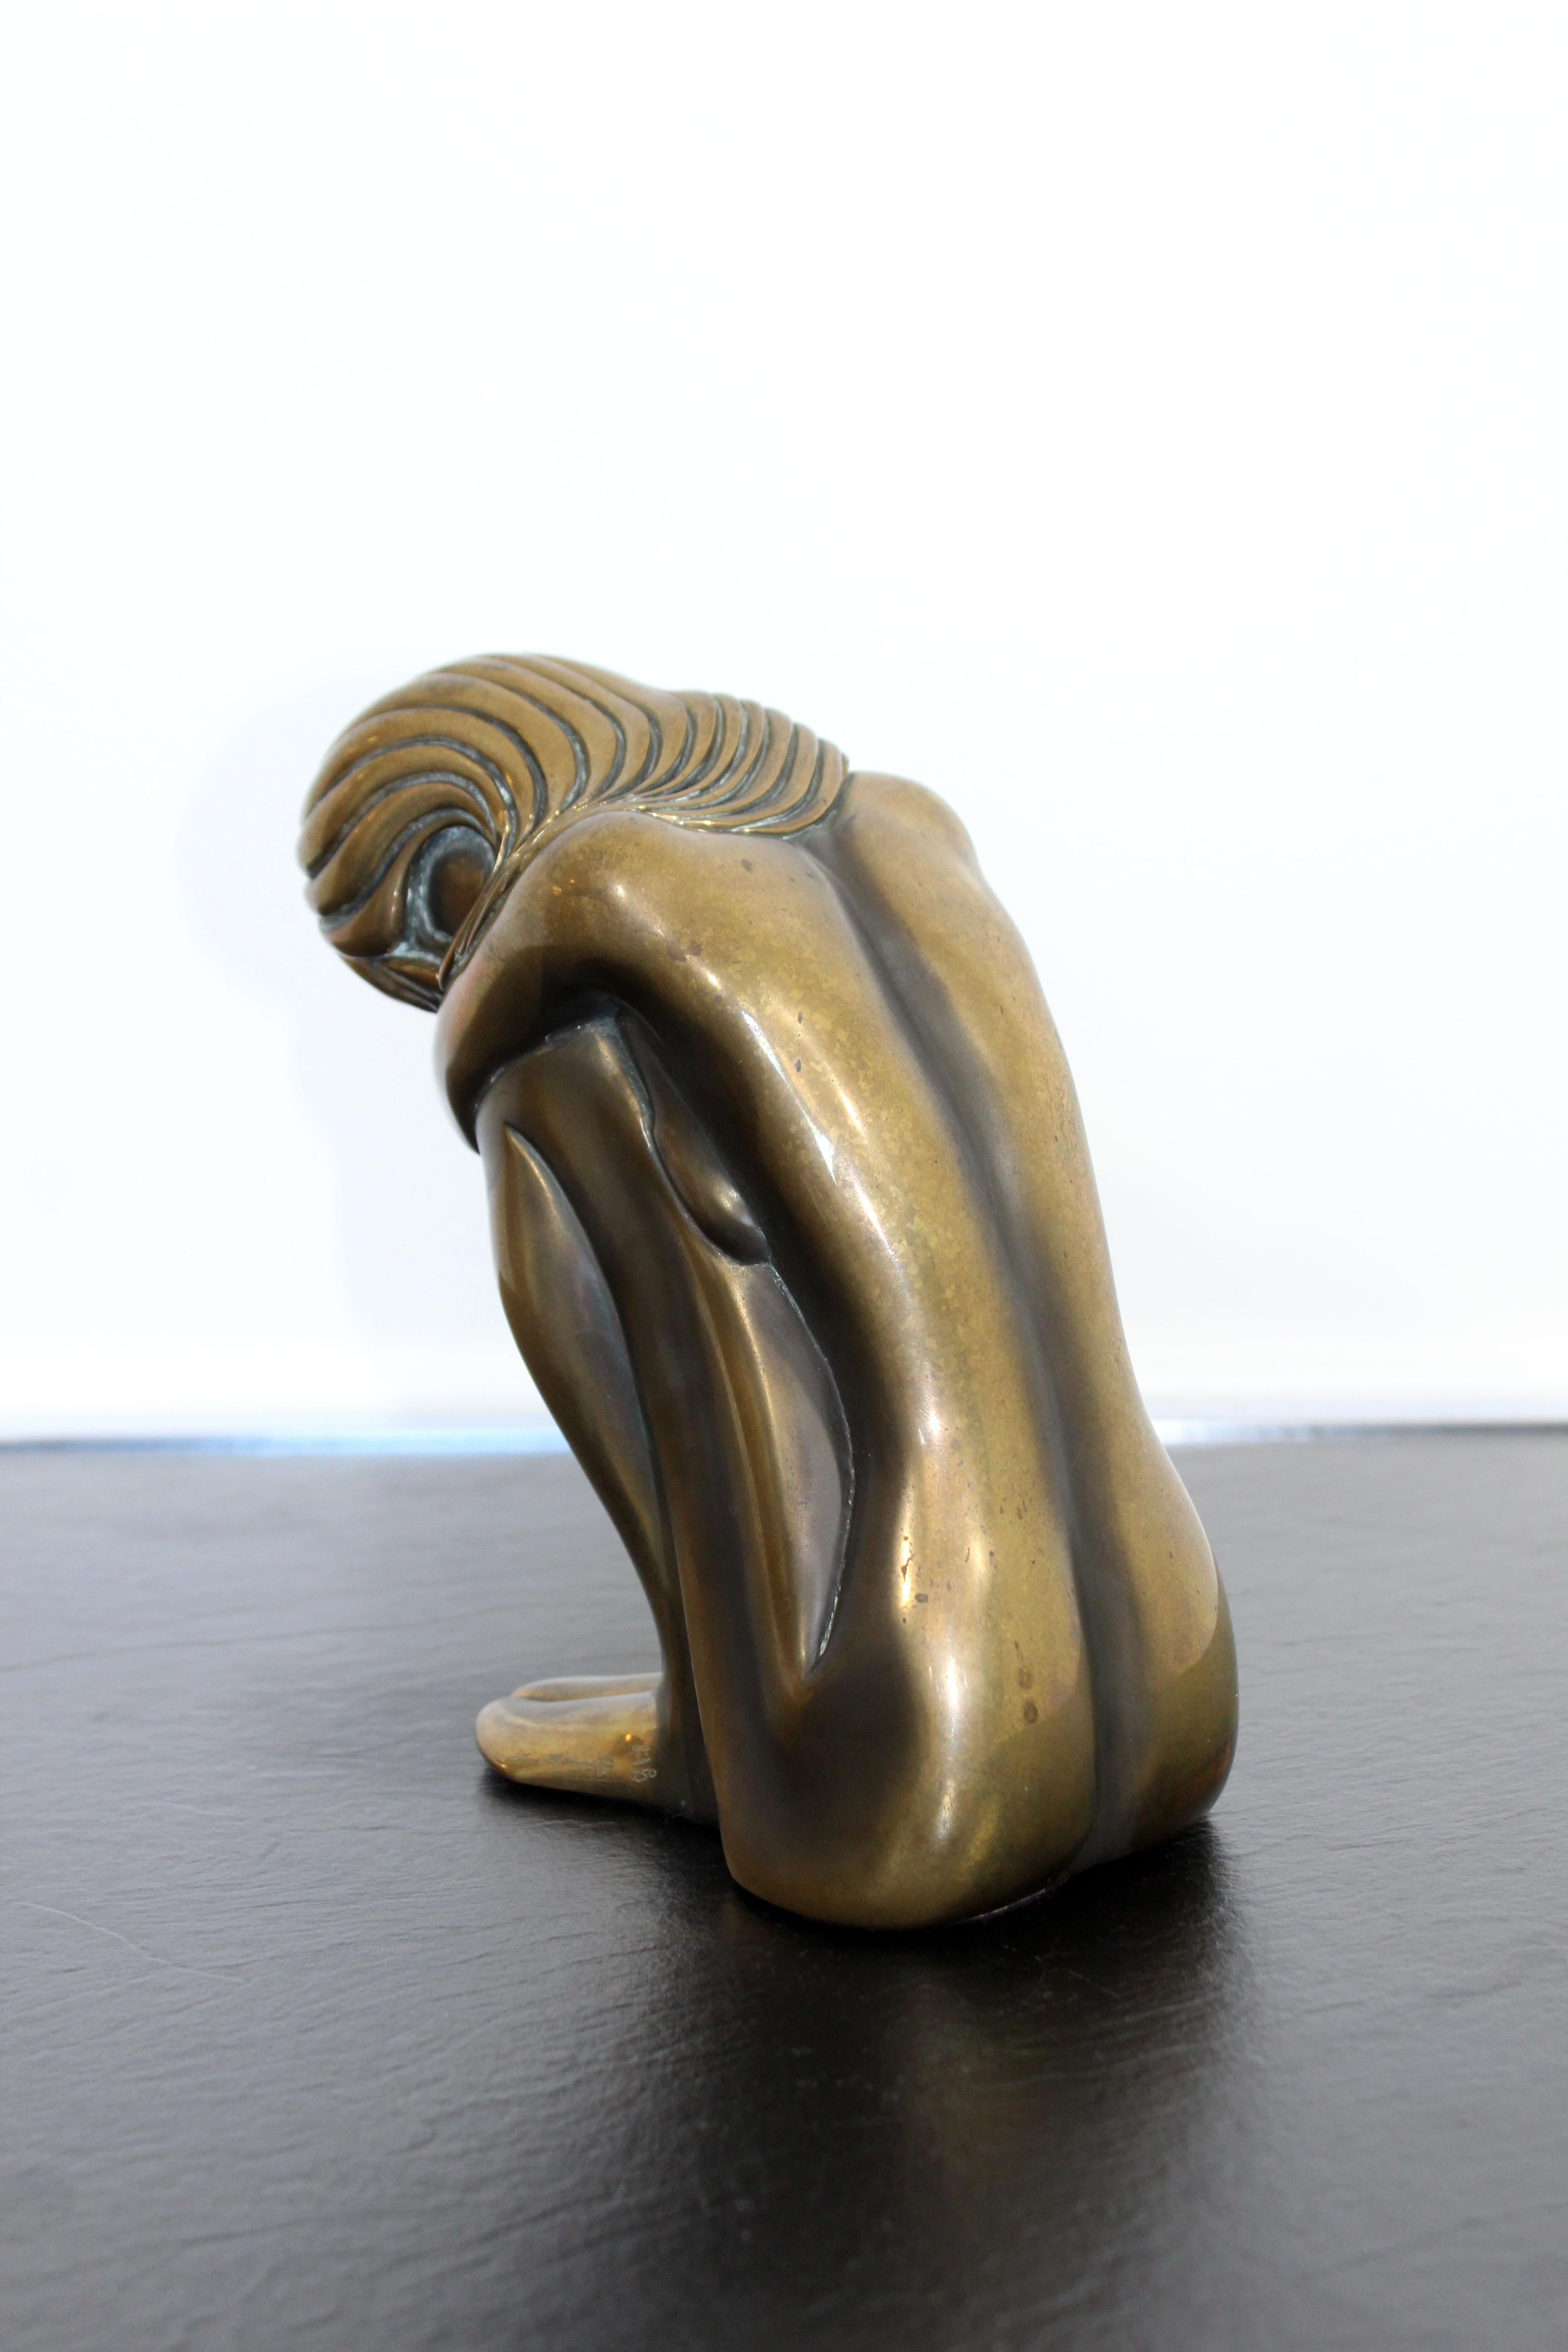 For your consideration is a moving, bronze art table sculpture of a nude woman, entitled 